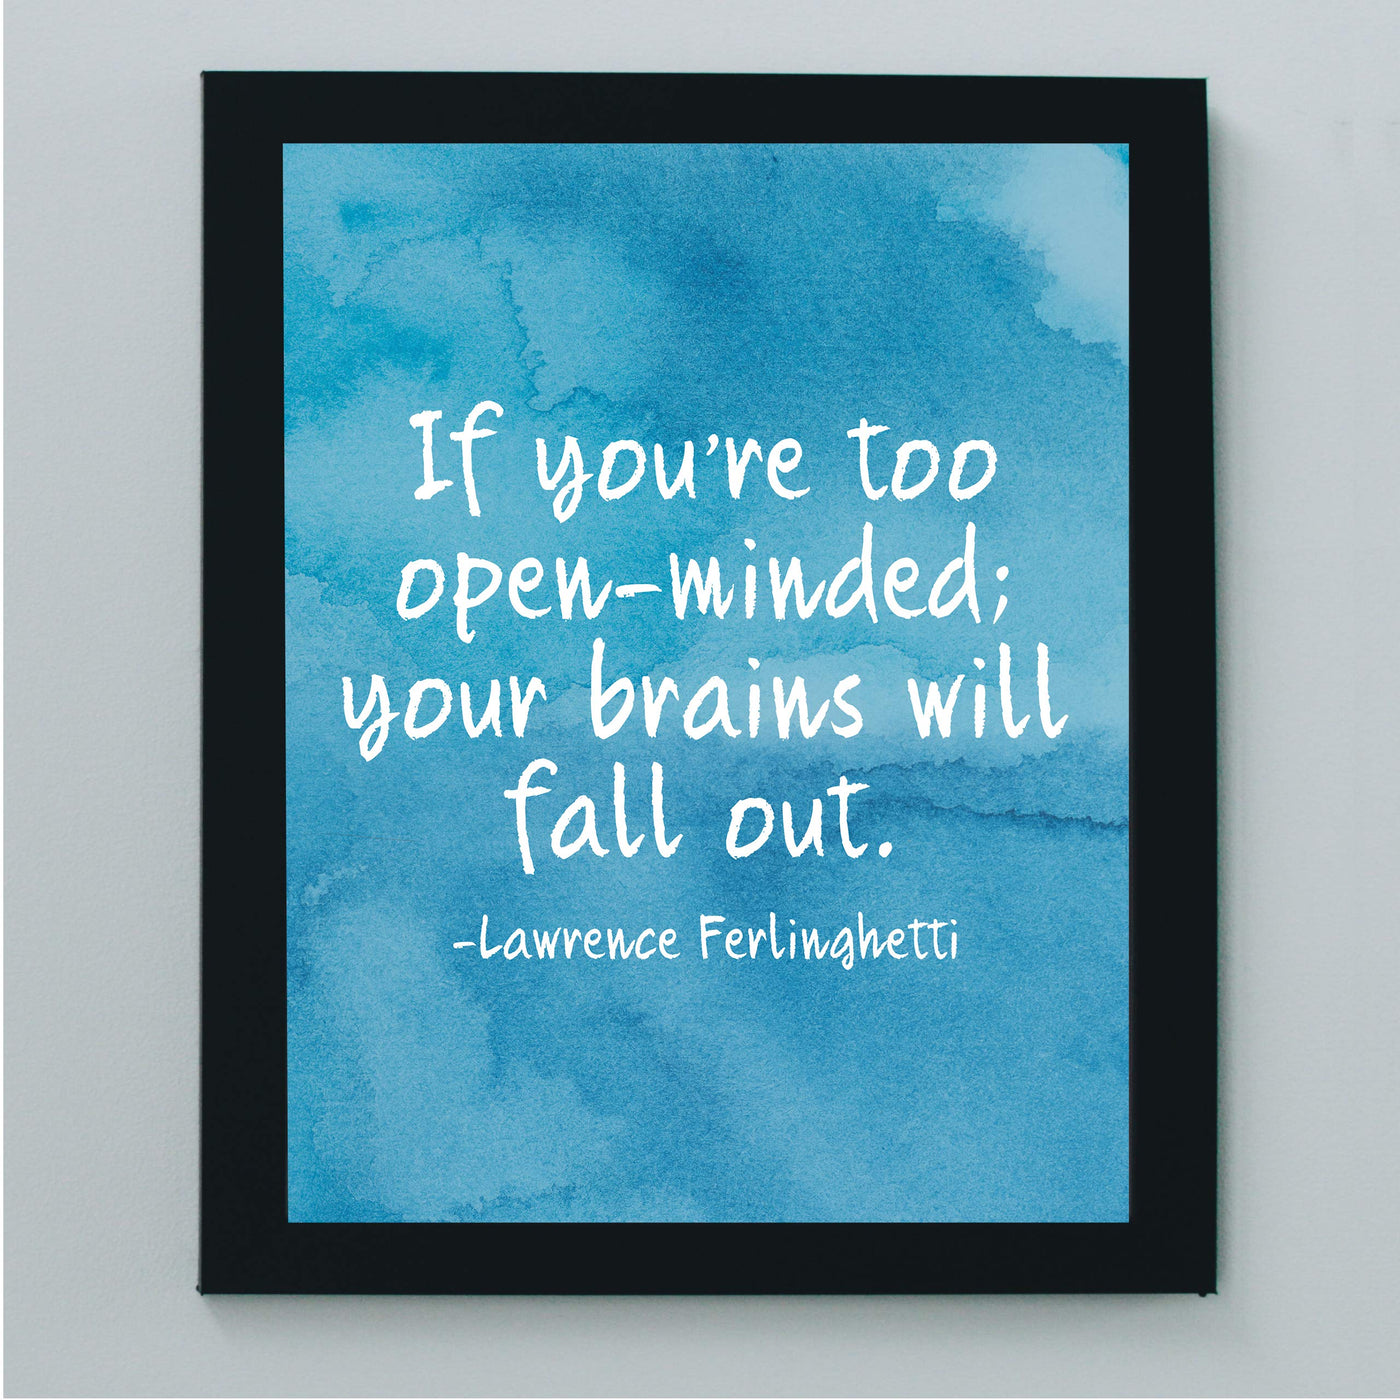 Lawrence Ferlinghetti-"If You're Too Open-Minded-Brains Will Fall Out"-Motivational Quotes Wall Sign-8 x 10" Abstract Art Print-Ready to Frame. Home-Office-Studio Decor. Great Gift for Poetry Fans!